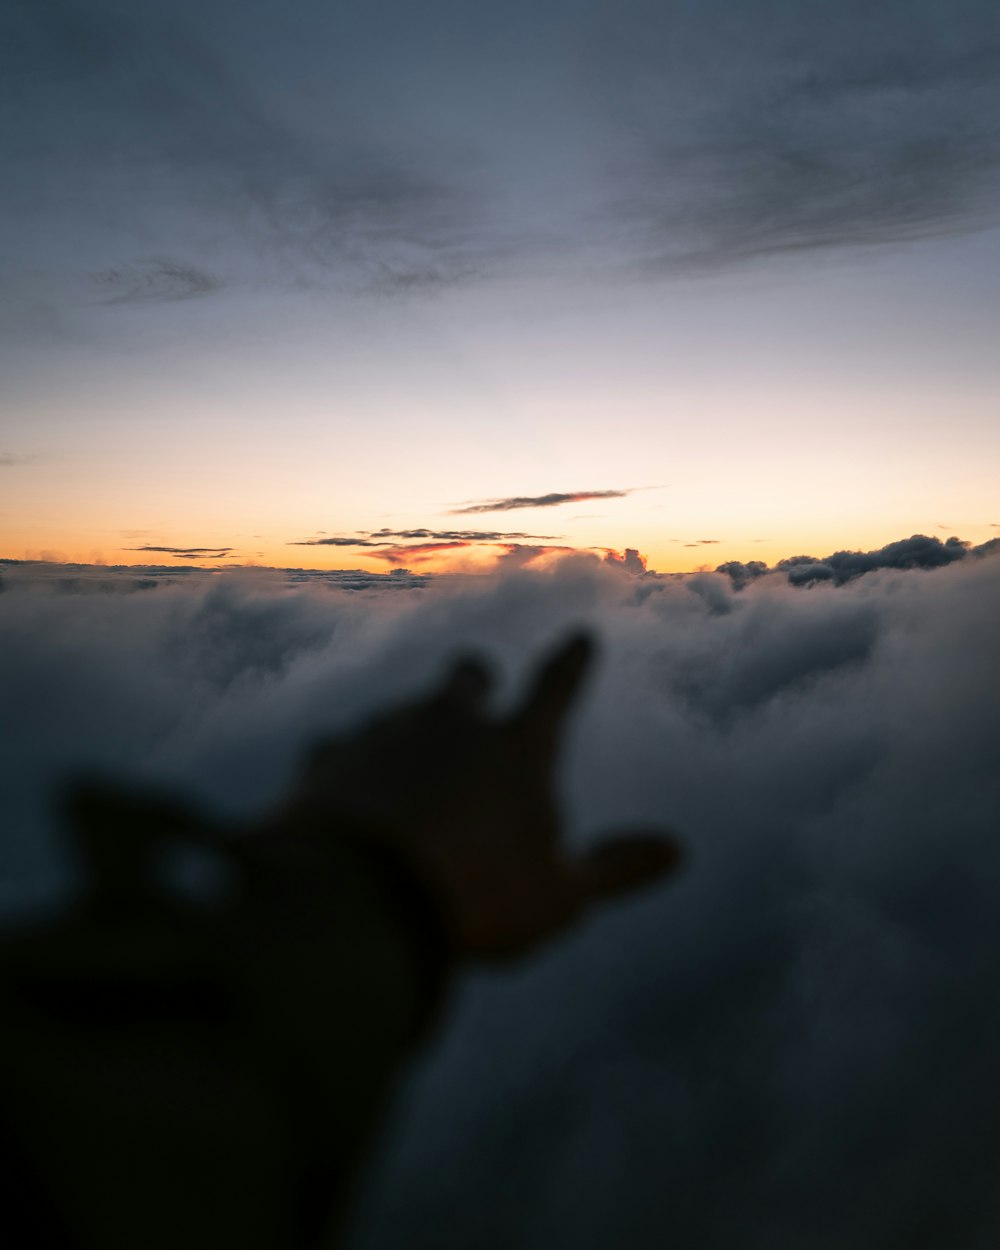 a person's hand reaching for the sky above the clouds